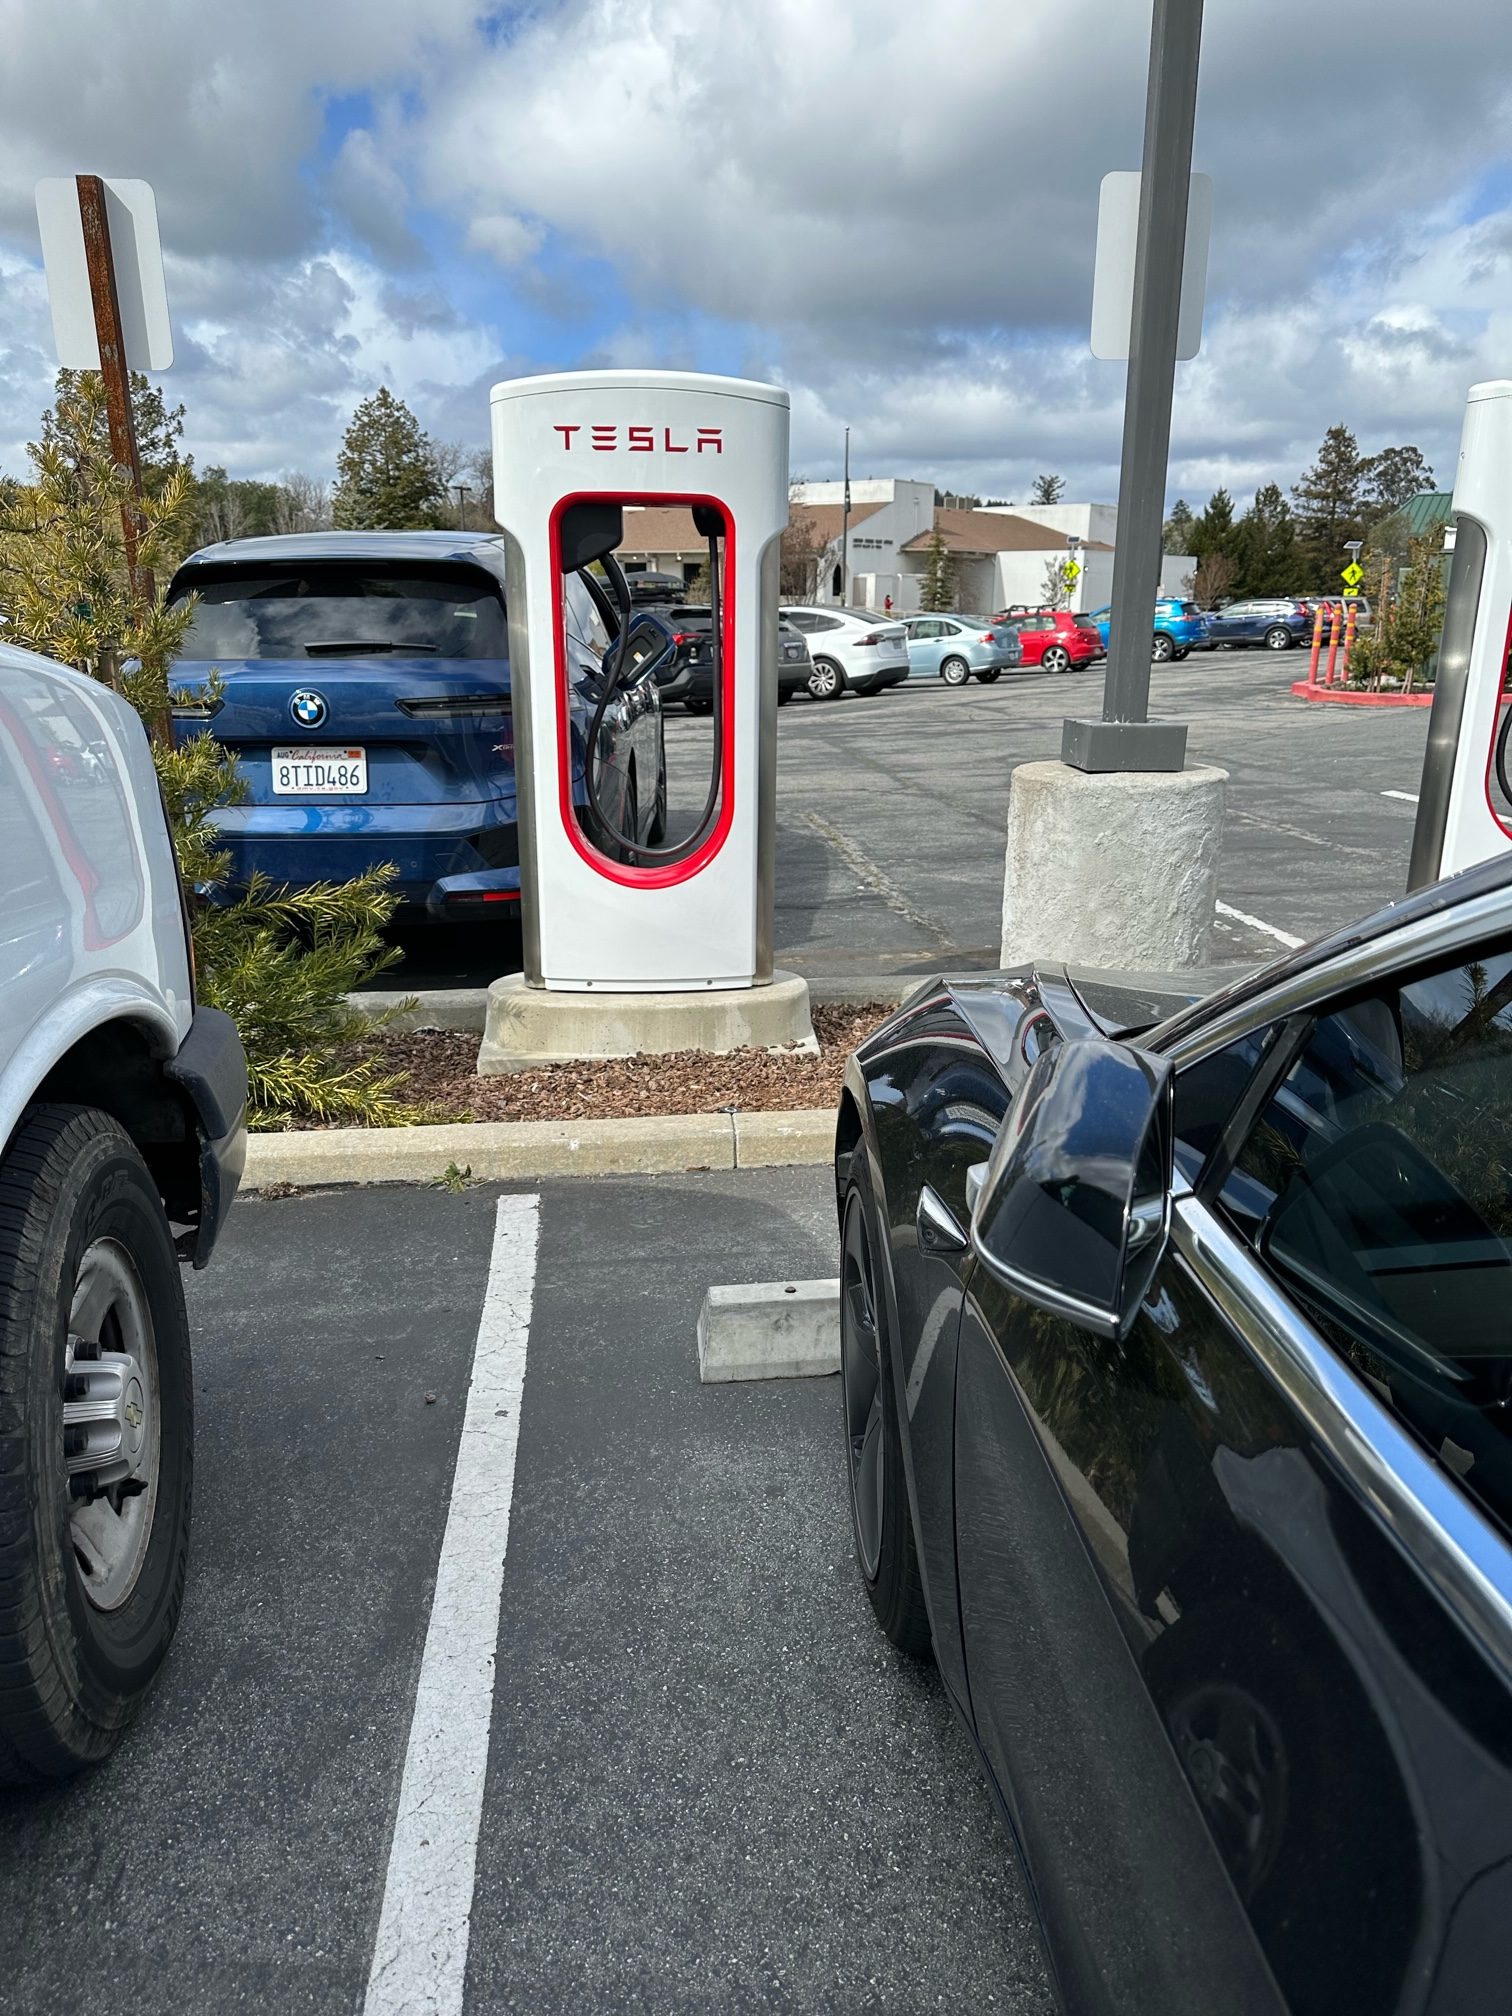 Tesla Starts Retrofitting Superchargers With Magic Dock to Allow Other EVs  to Charge